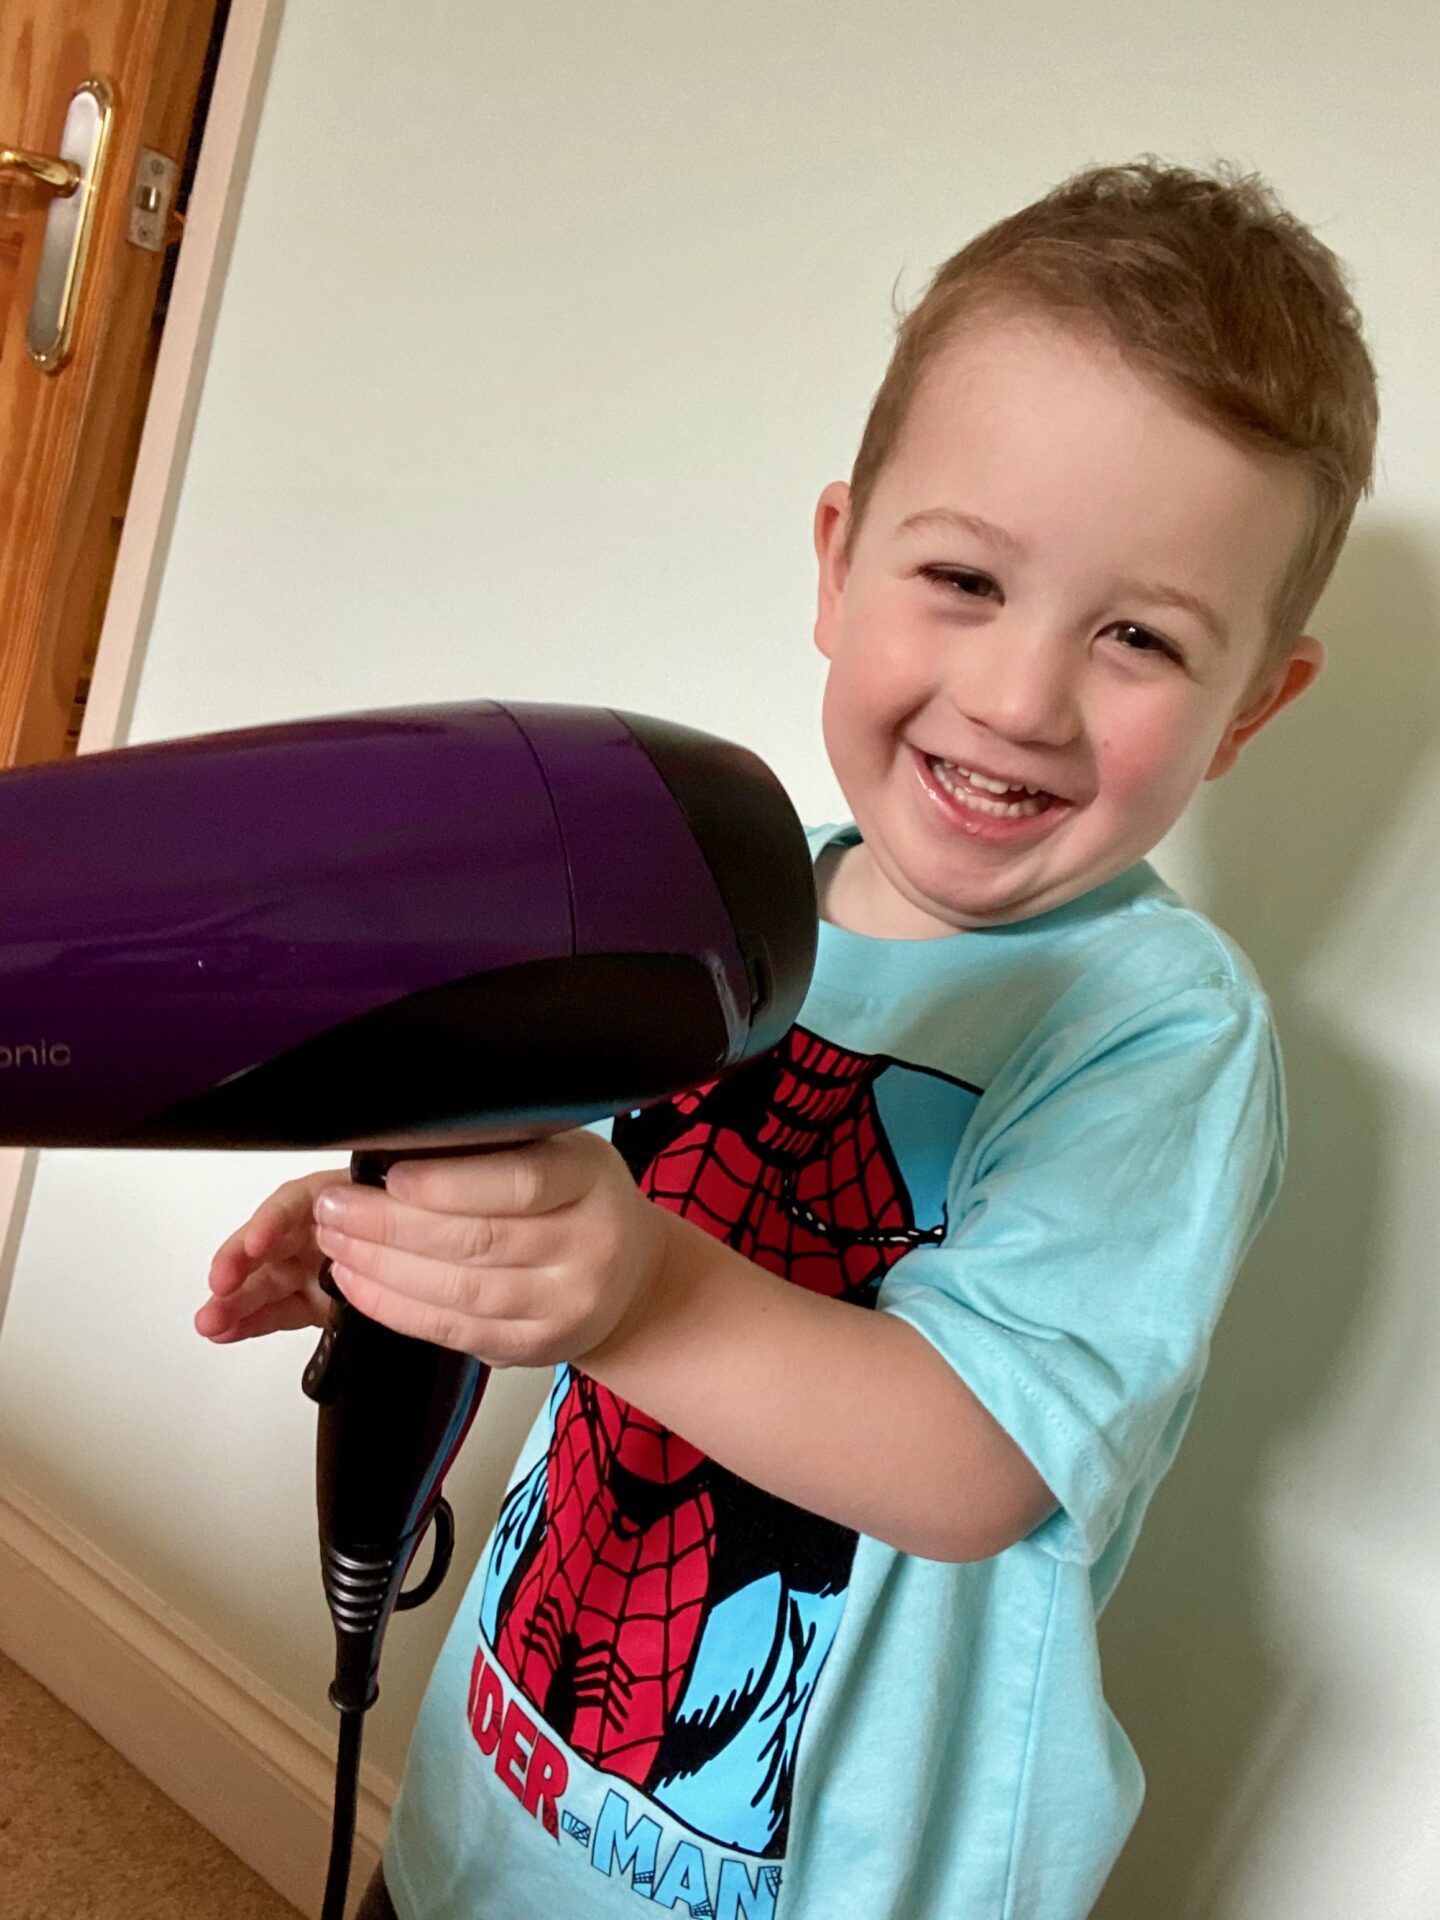 3 year old smiling boy holding a hair dryer